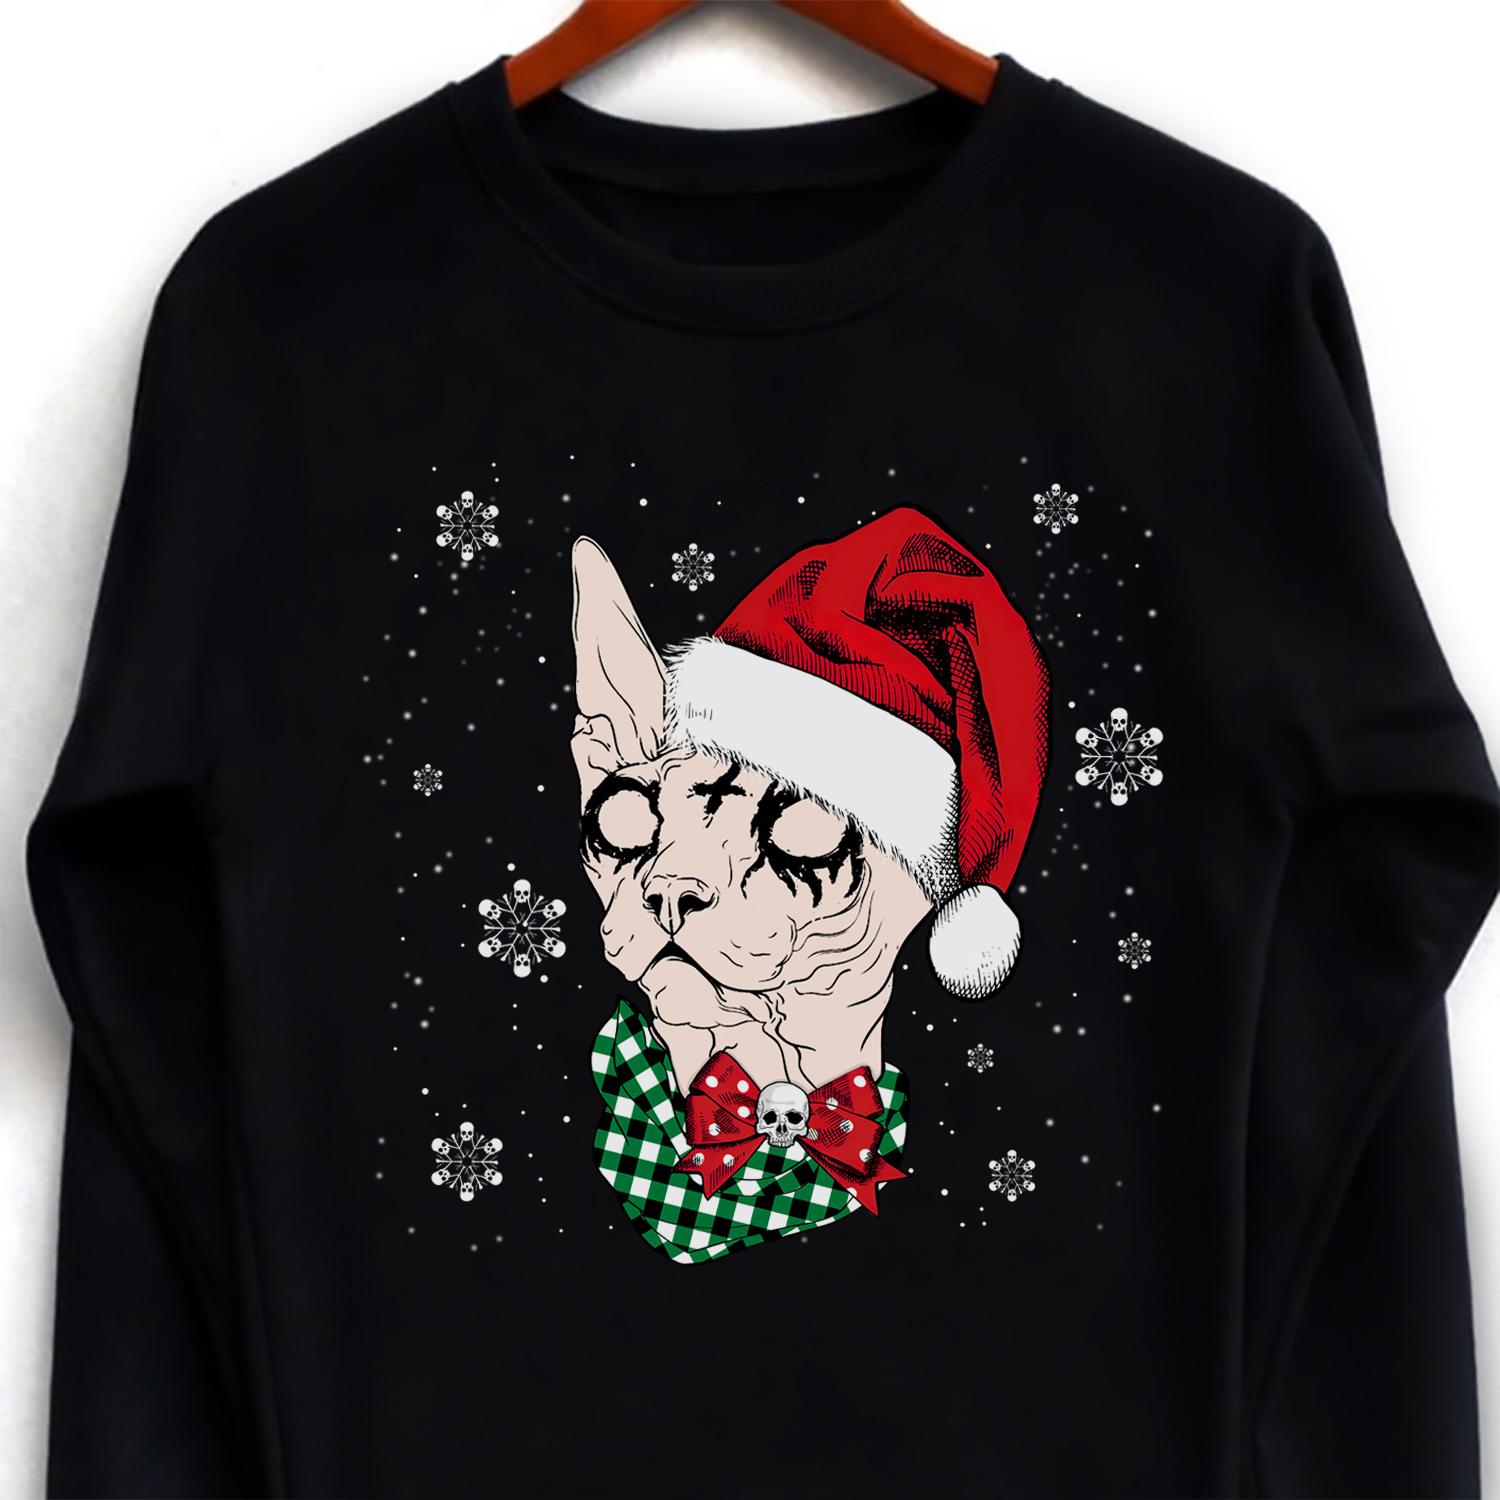 Satanic Sphynx Cat Christmas Hat - Ugly Sweater, Christmas Day Gift